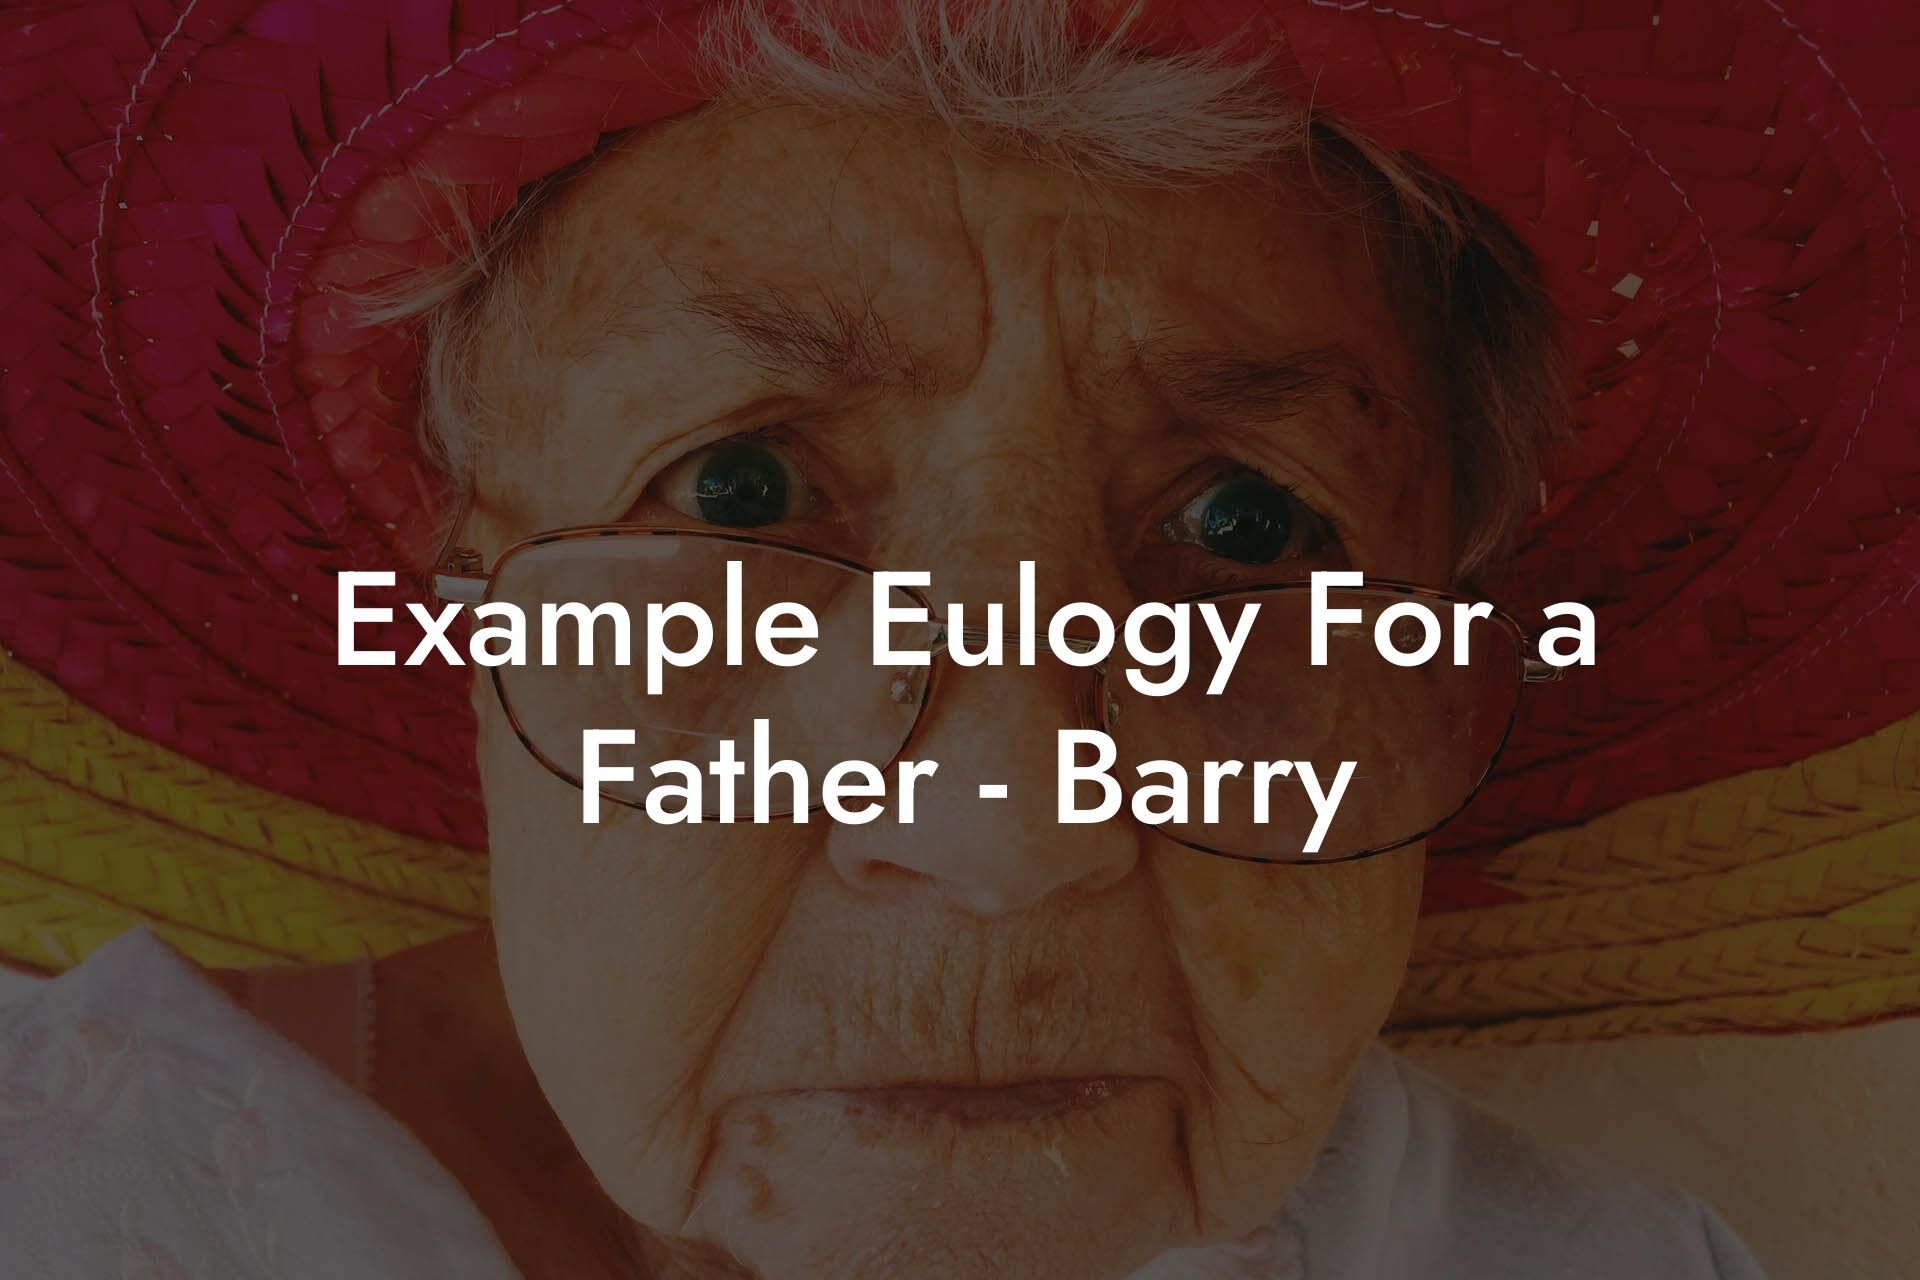 Example Eulogy For a Father   Barry